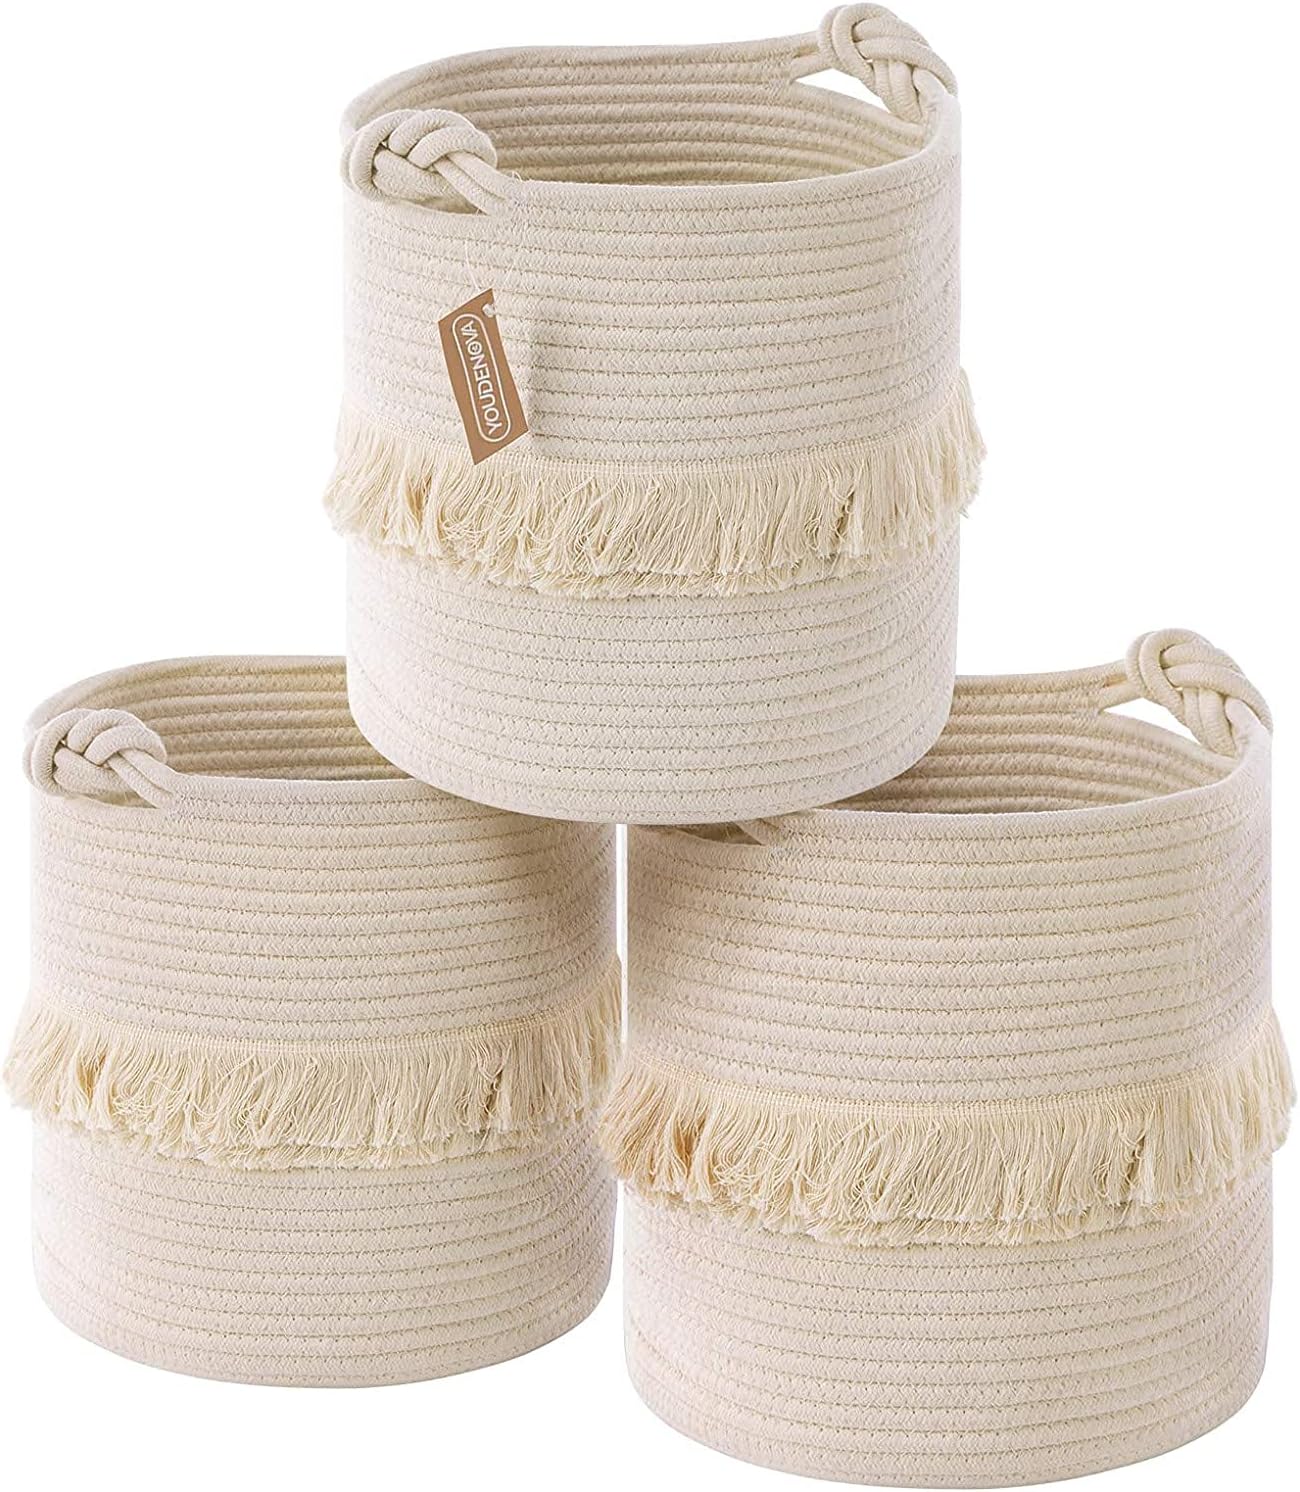 YOUDENOVA Rope Storage Baskets Set of 3 - Stylish Woven Baskets with Reinforced Handles for Effortless Toy Storage and Baby Gift Organization in Nursery, Living Room, and Bedroom